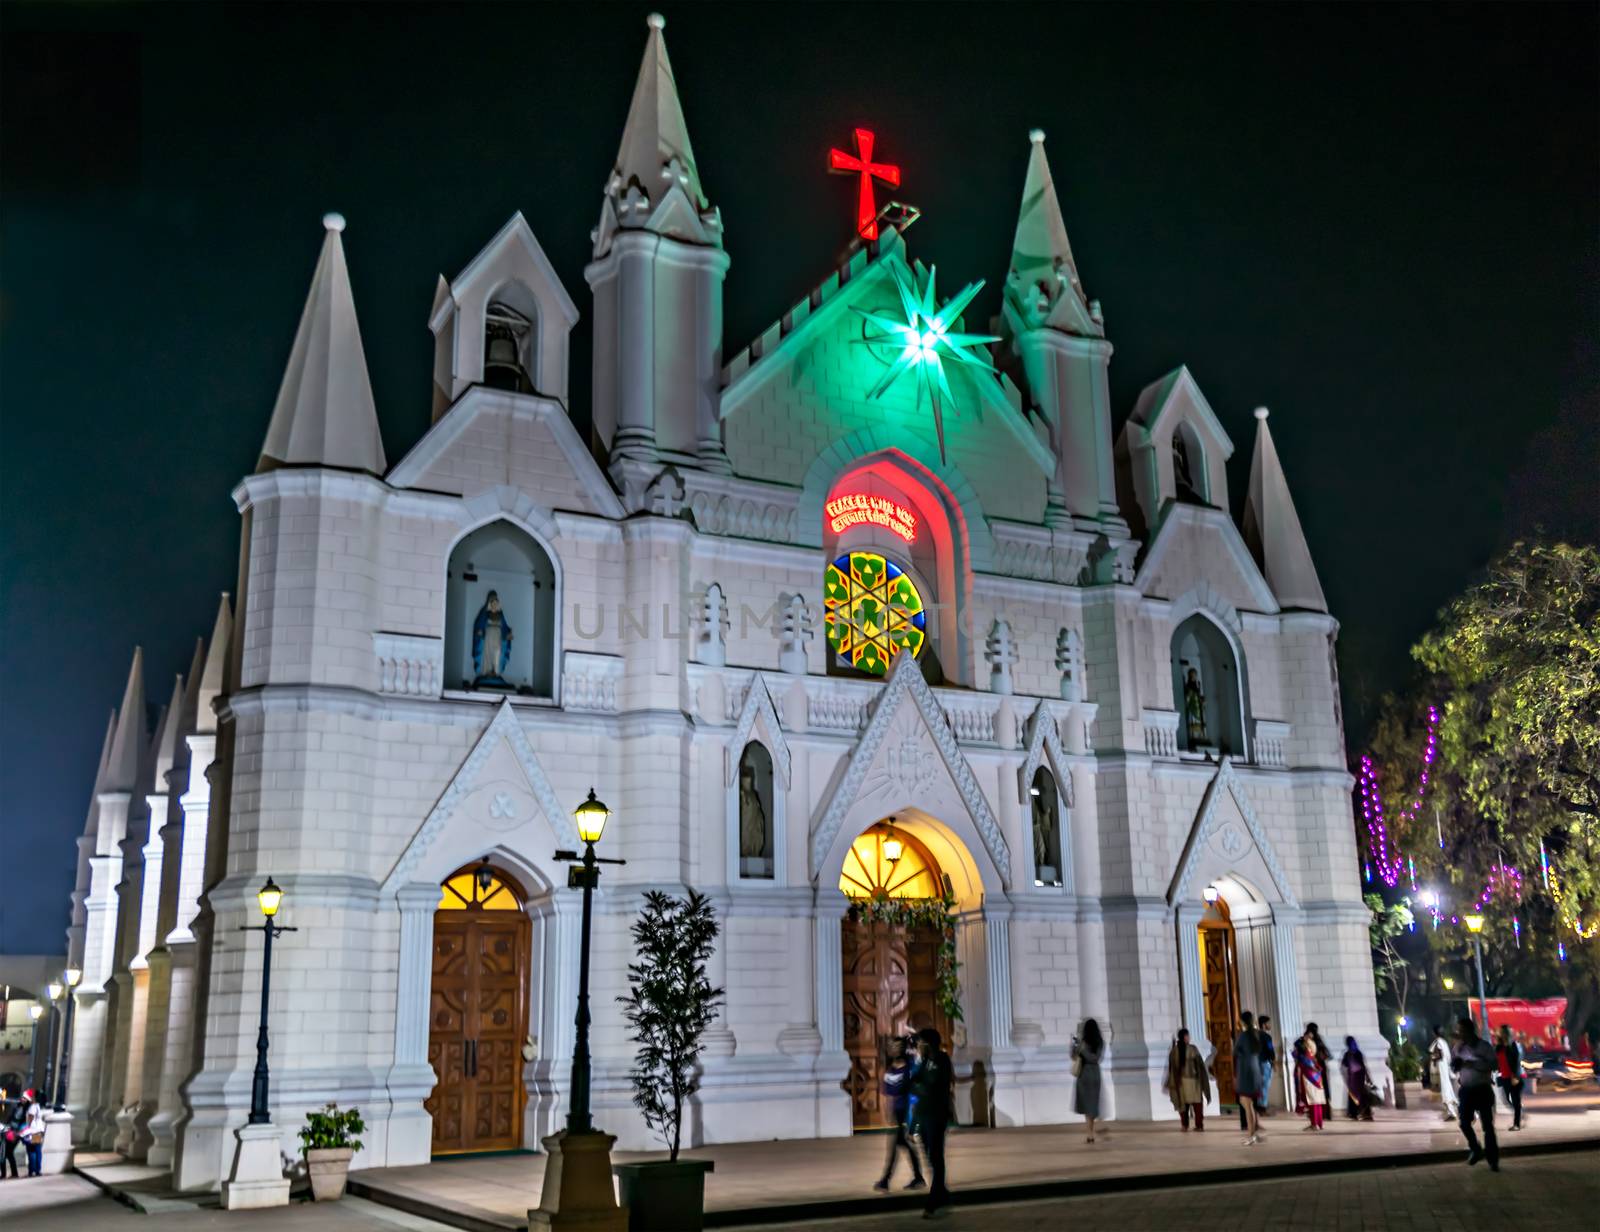 The 160 year old magnificent structure and an iconic landmark in the city - Saint Patrick’s Cathedral. It is specially illuminated on Christmas eve. by lalam